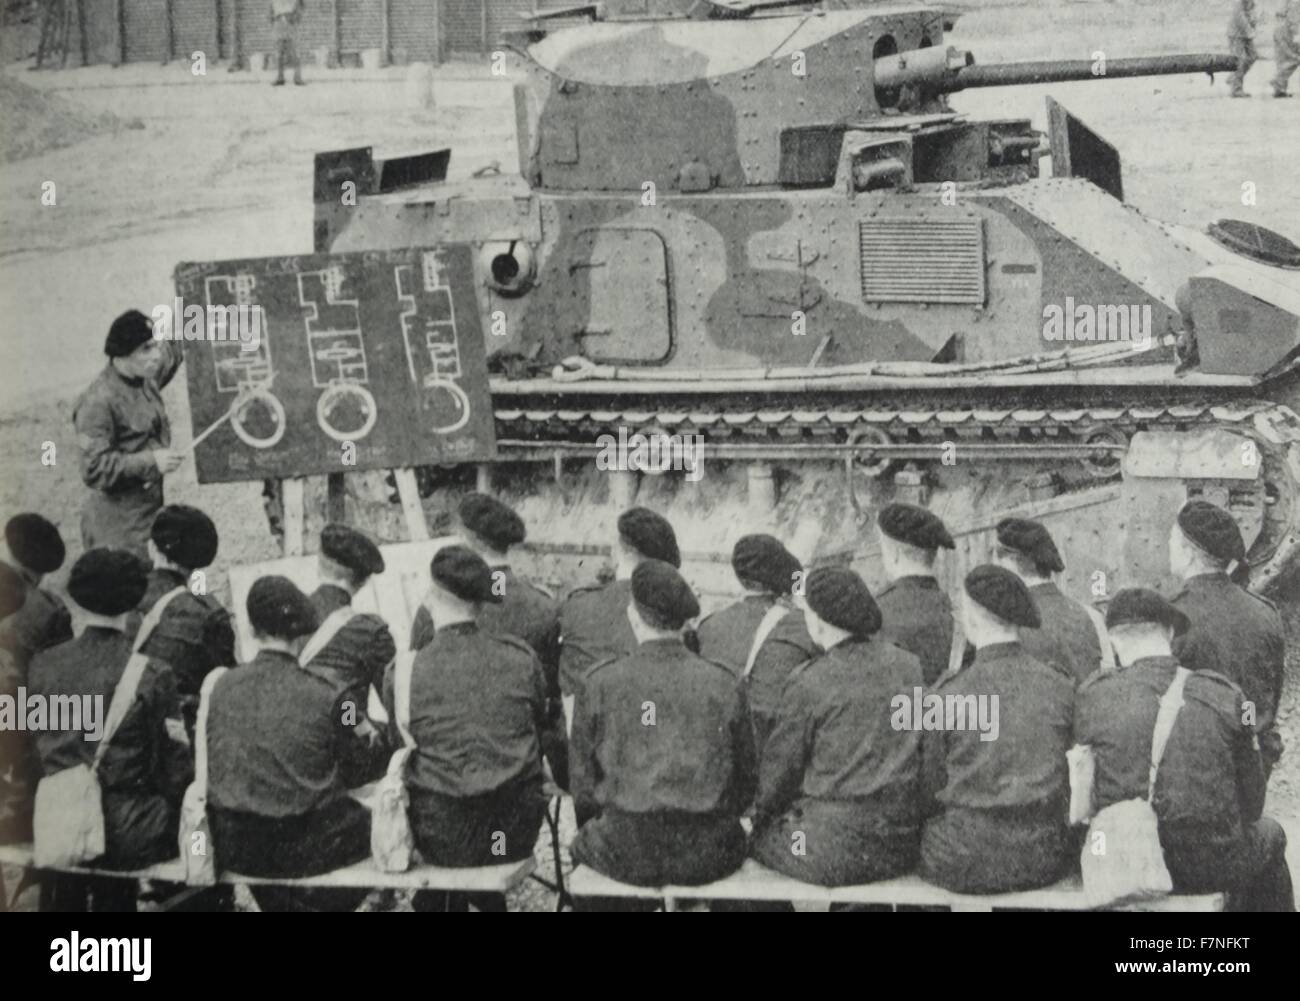 Tank training in England during World War Two 1940. The tank which made its first appearance during the Battle of the Somme.  Here men of the Tank Corps are being instructed in engineering theory - a practical demonstration will afterwards be given on the tank itself. Stock Photo